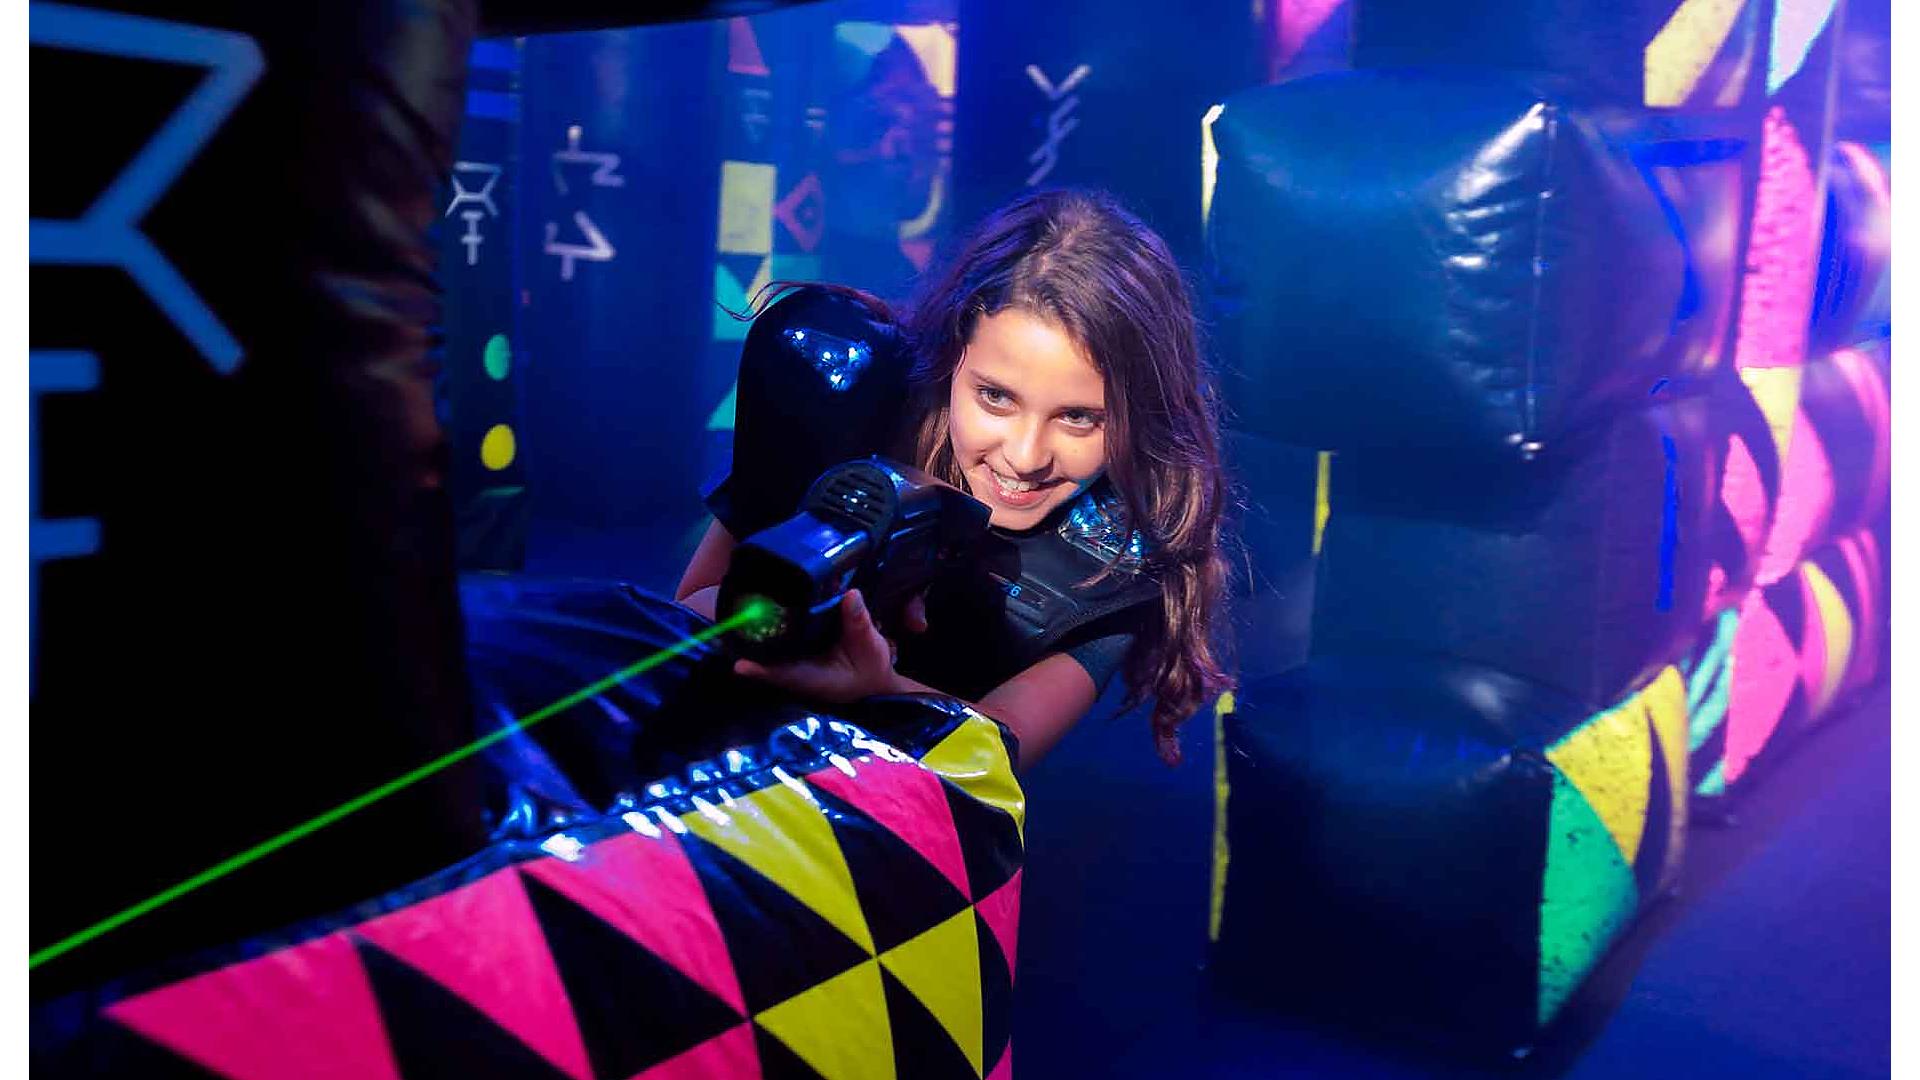 laser-tag-girl-aiming-laser-playing